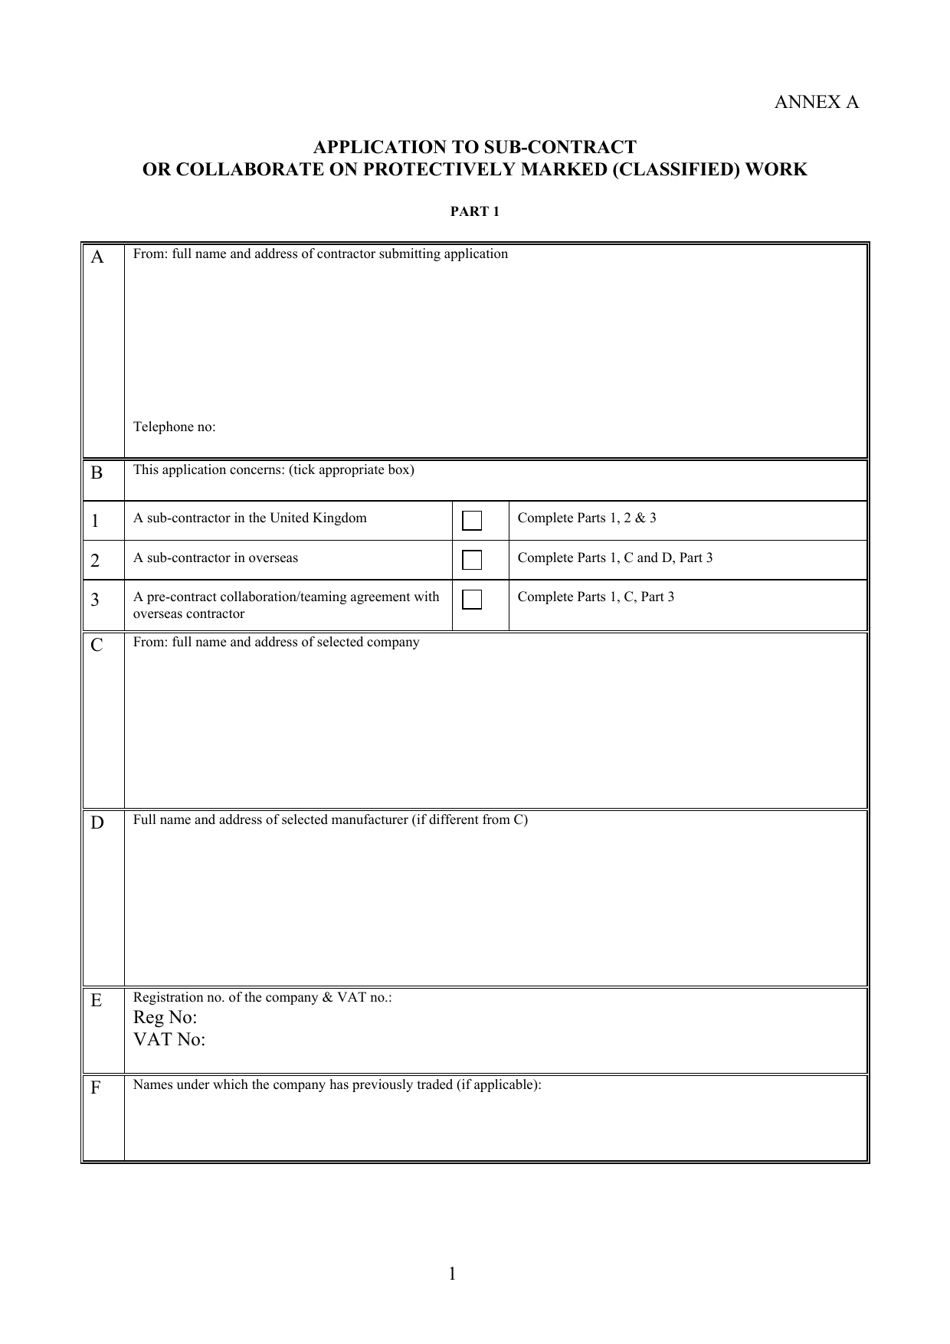 Annex A Application to Sub-contract or Collaborate on Protectively Marked (Classified) Work - United Kingdom, Page 1